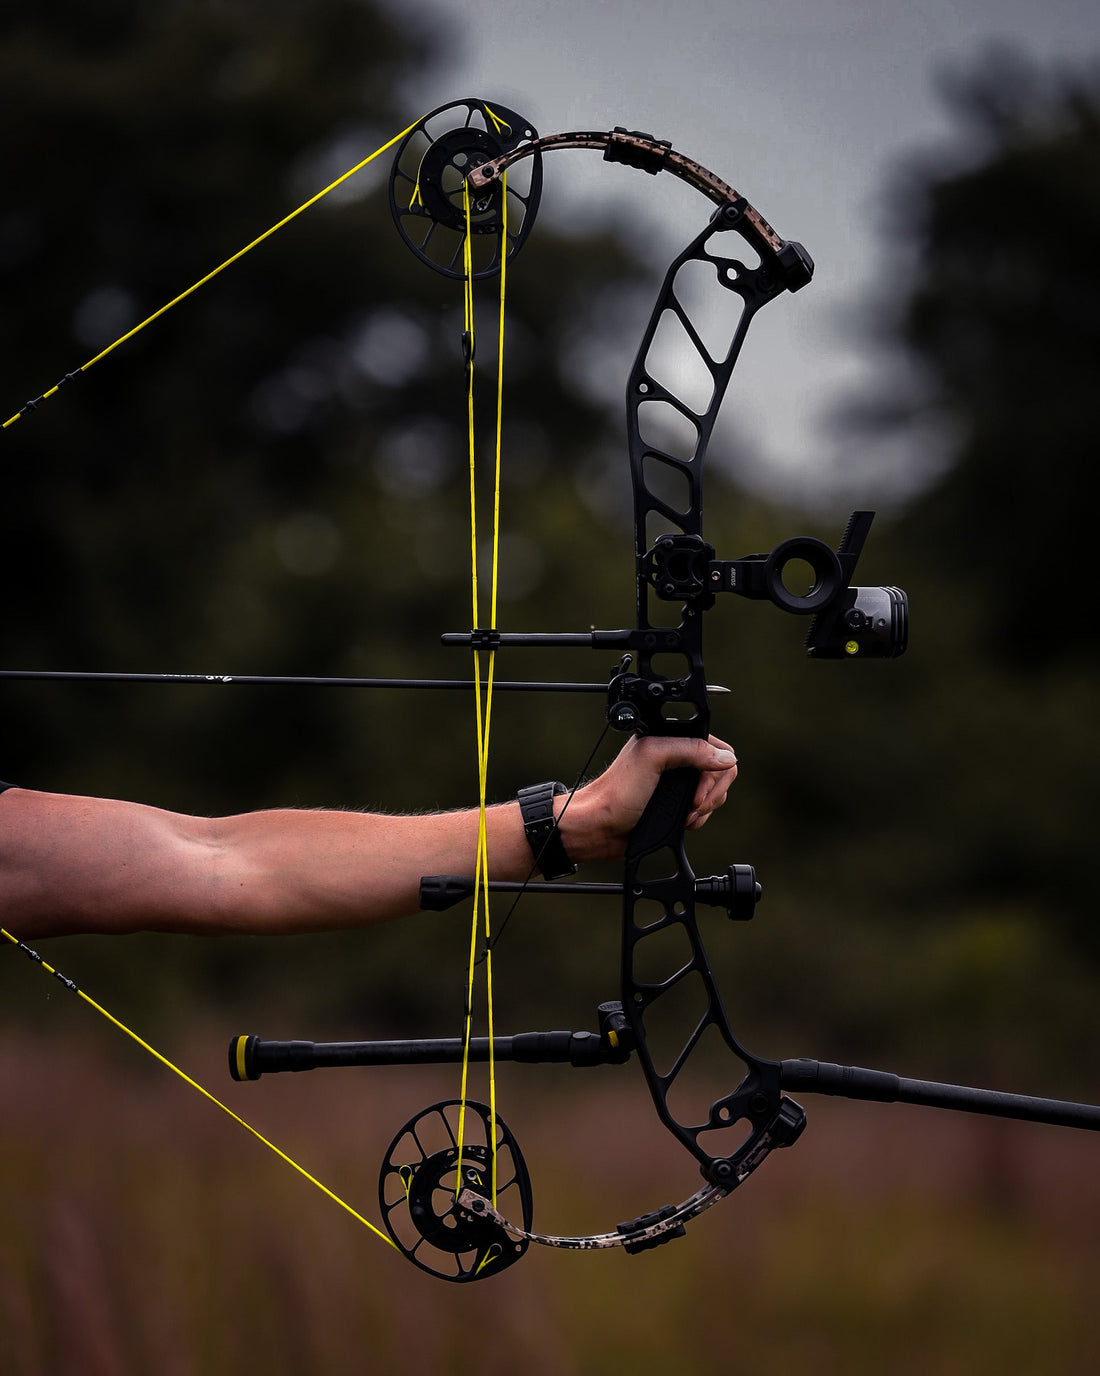 Image of a PSE bow. Image is framed so that the bow fills the frame.